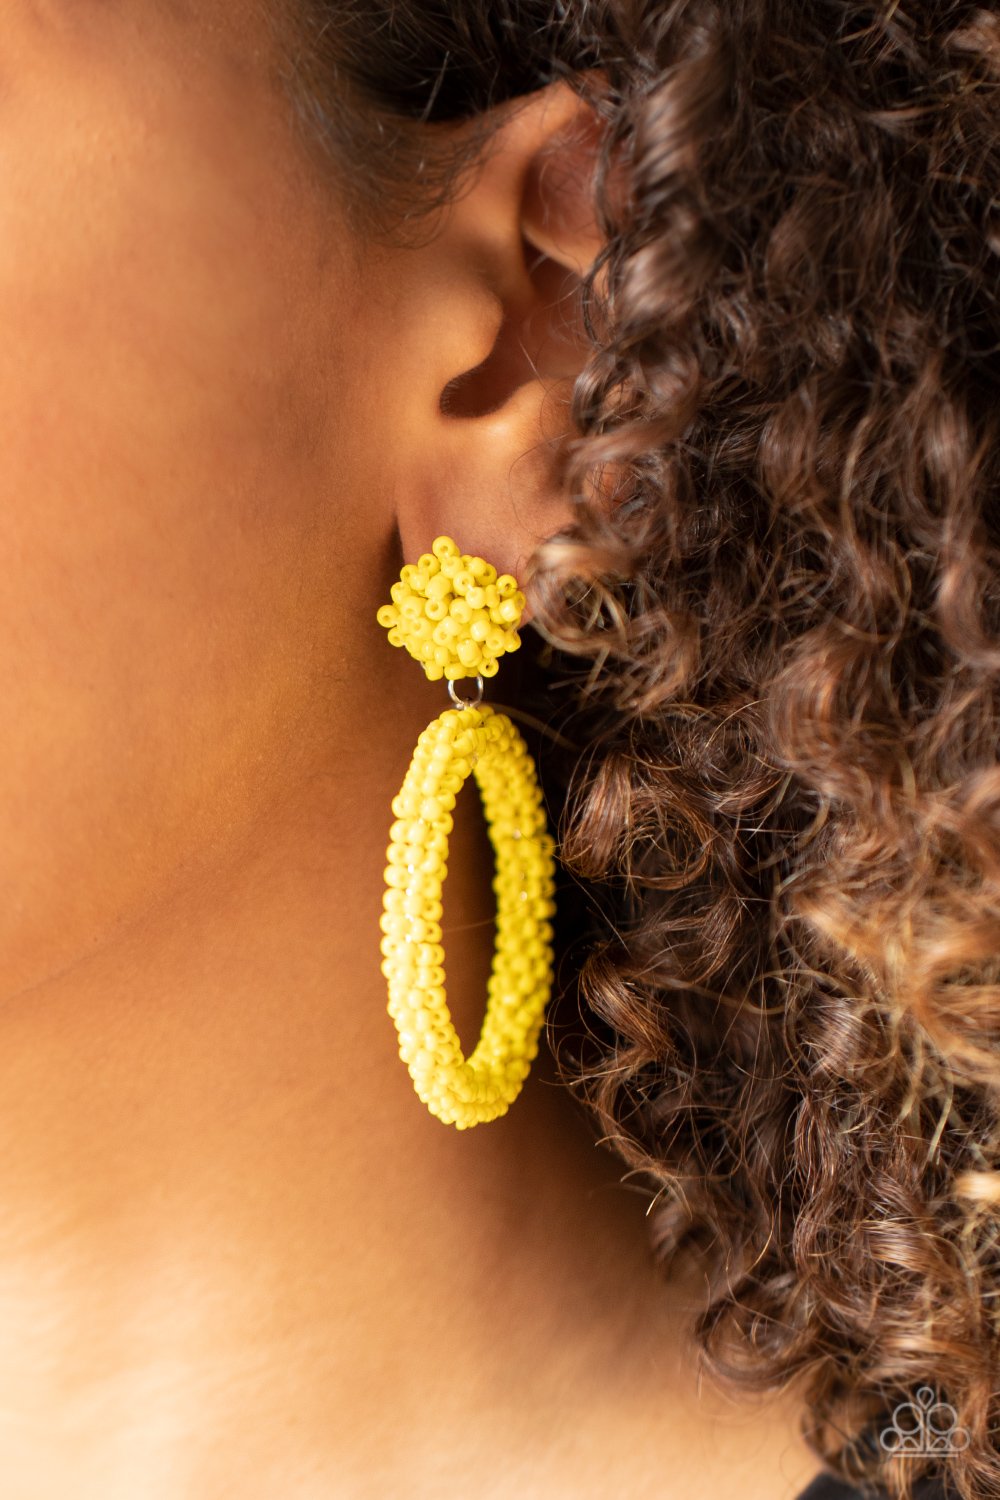 &lt;p&gt;A sunny collection of dainty yellow seed beads are woven around a circular frame at the bottom of a matching beaded fitting, creating a colorful hoop. Earring attaches to a standard post fitting.&lt;/p&gt;  

&lt;p&gt; &lt;i&gt;  Sold as one pair of post earrings. &lt;/i&gt;  &lt;/p&gt;


&lt;img src=\&quot;https://d9b54x484lq62.cloudfront.net/paparazzi/shopping/images/517_tag150x115_1.png\&quot; alt=\&quot;New Kit\&quot; align=\&quot;middle\&quot; height=\&quot;50\&quot; width=\&quot;50\&quot;&gt;